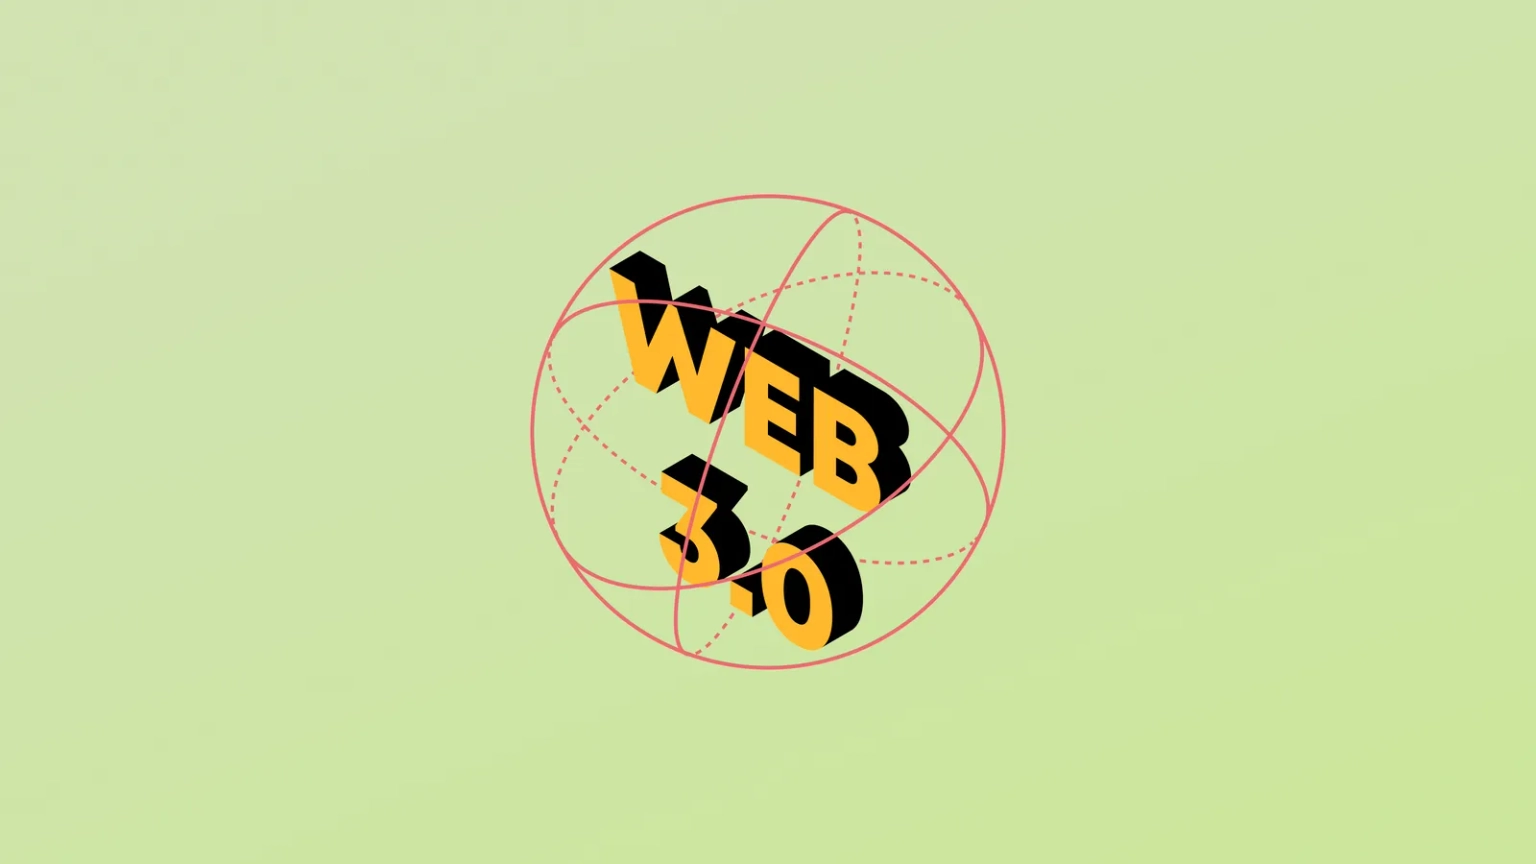 Web3 How Is It Different